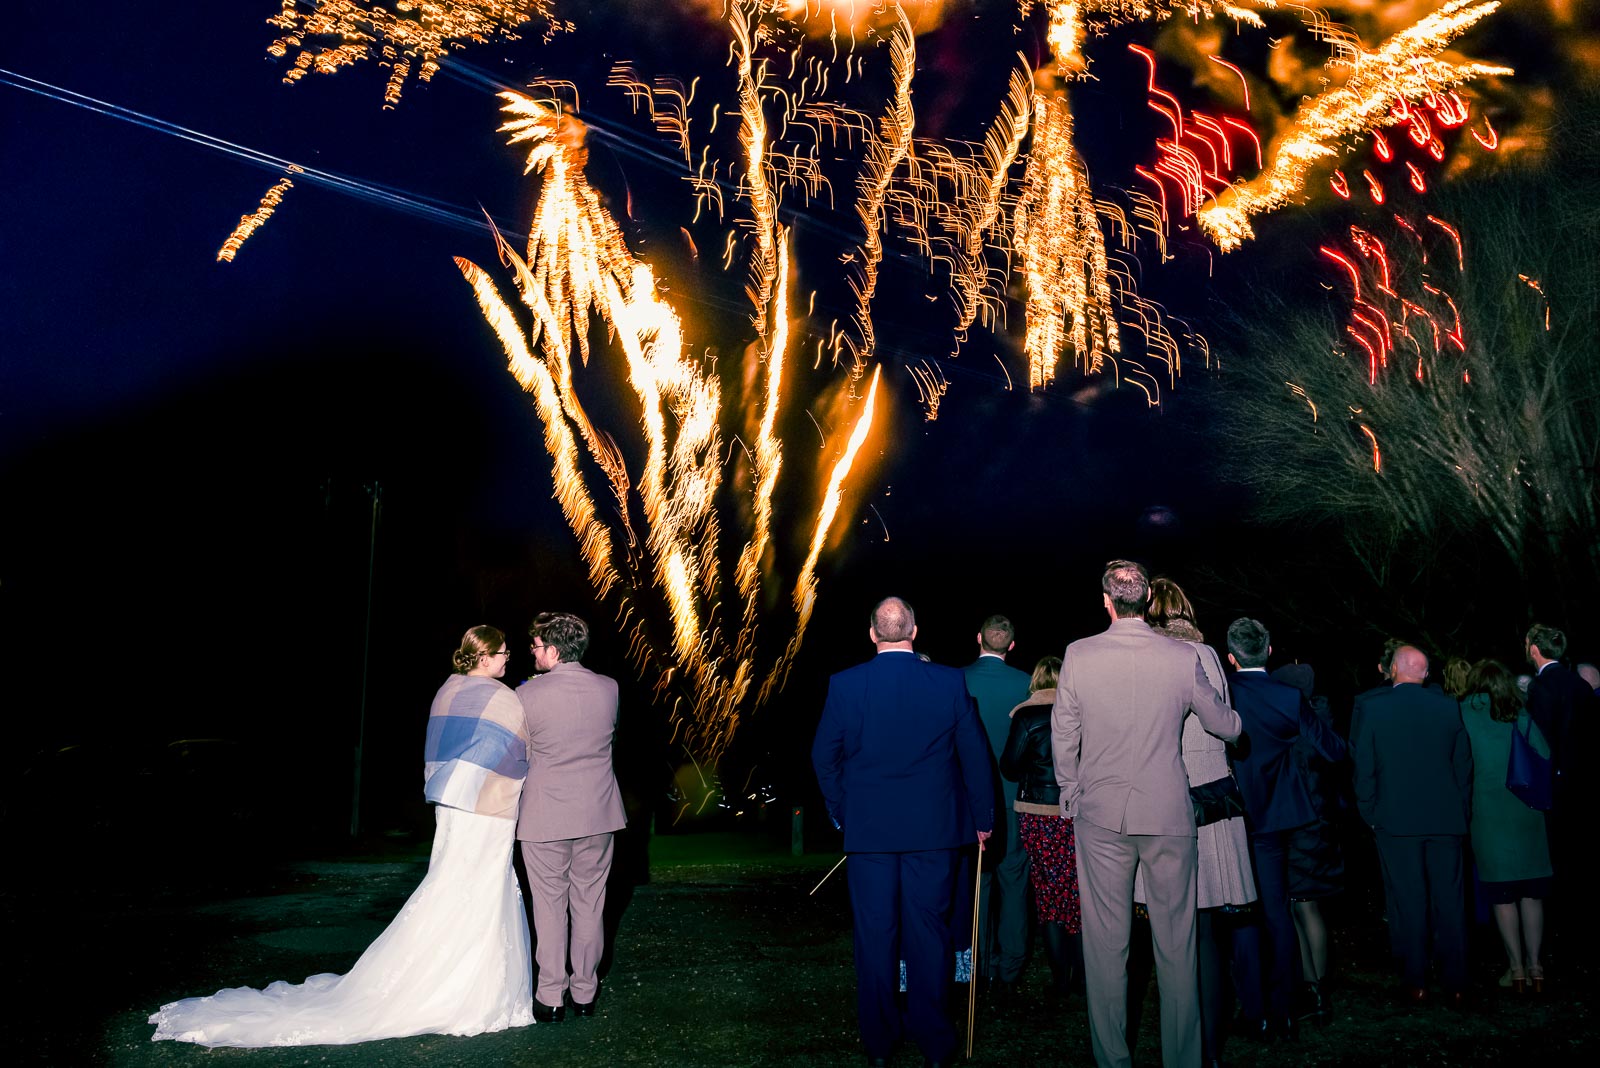 Lewis, Stephanie and their wedding guests enjoy a firework display in the gardens at Folkington Manor near Polegate.